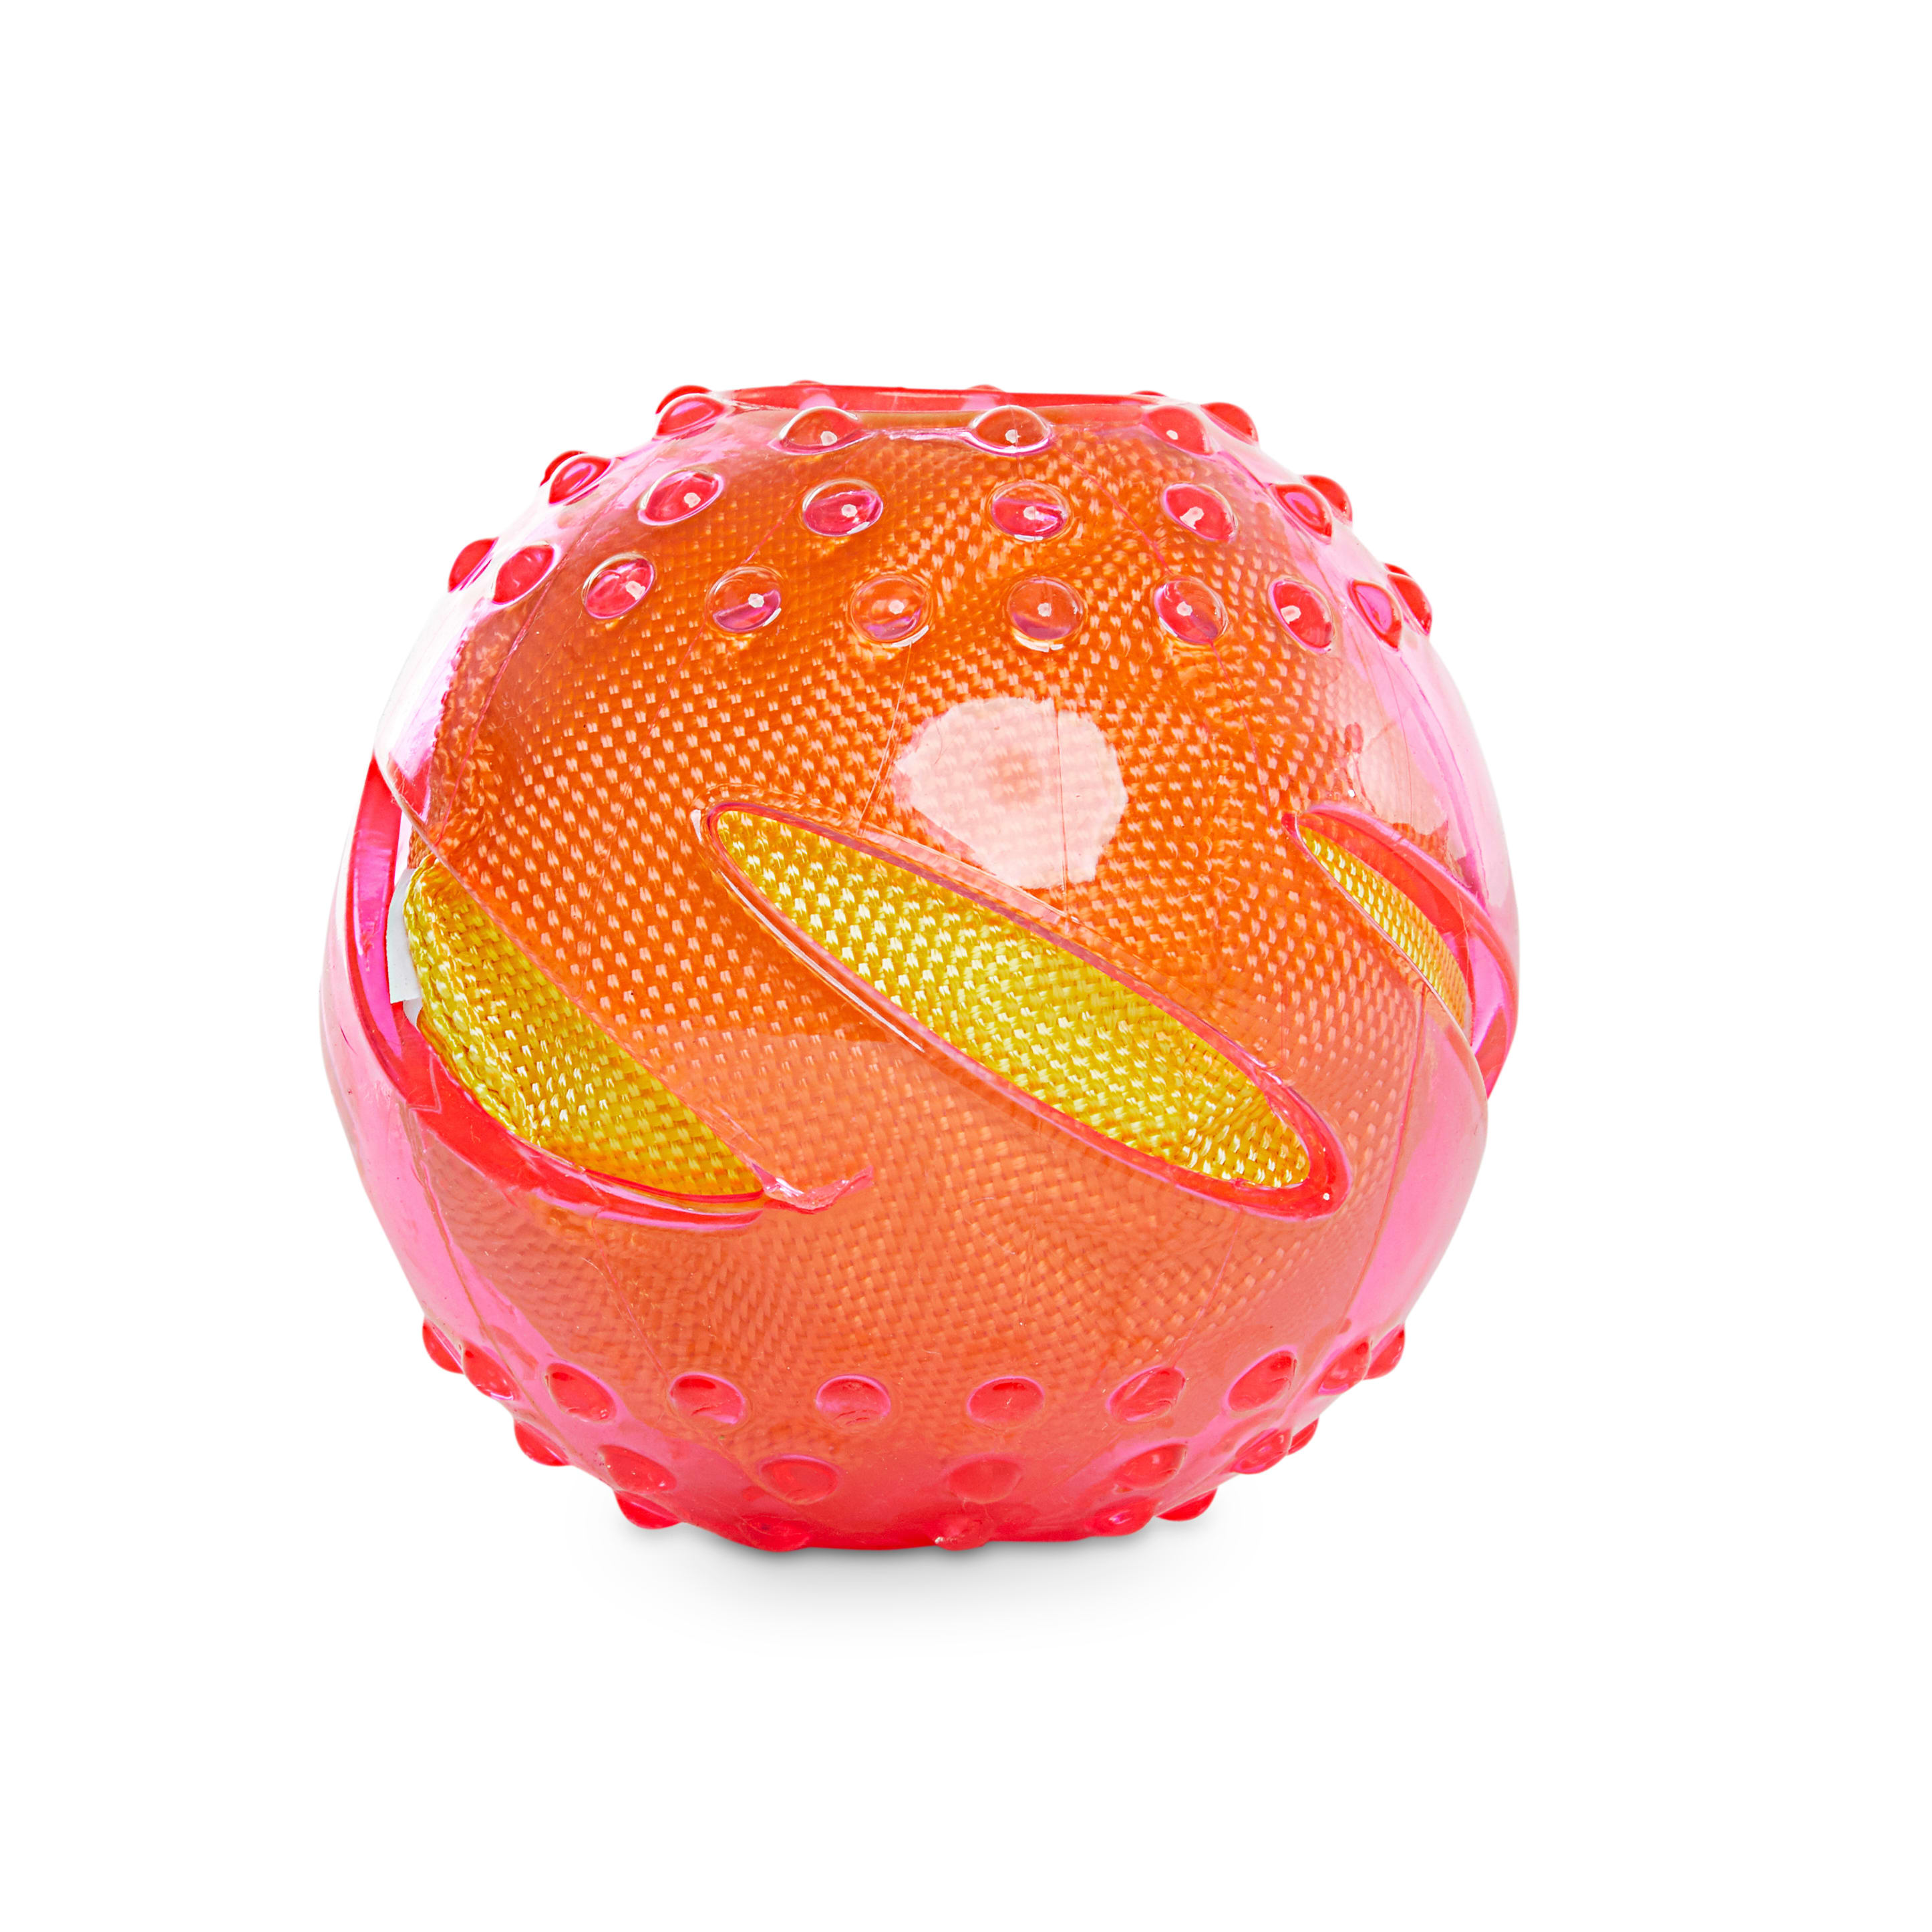 Bounds Crinkle Ball Assorted Dog Toy